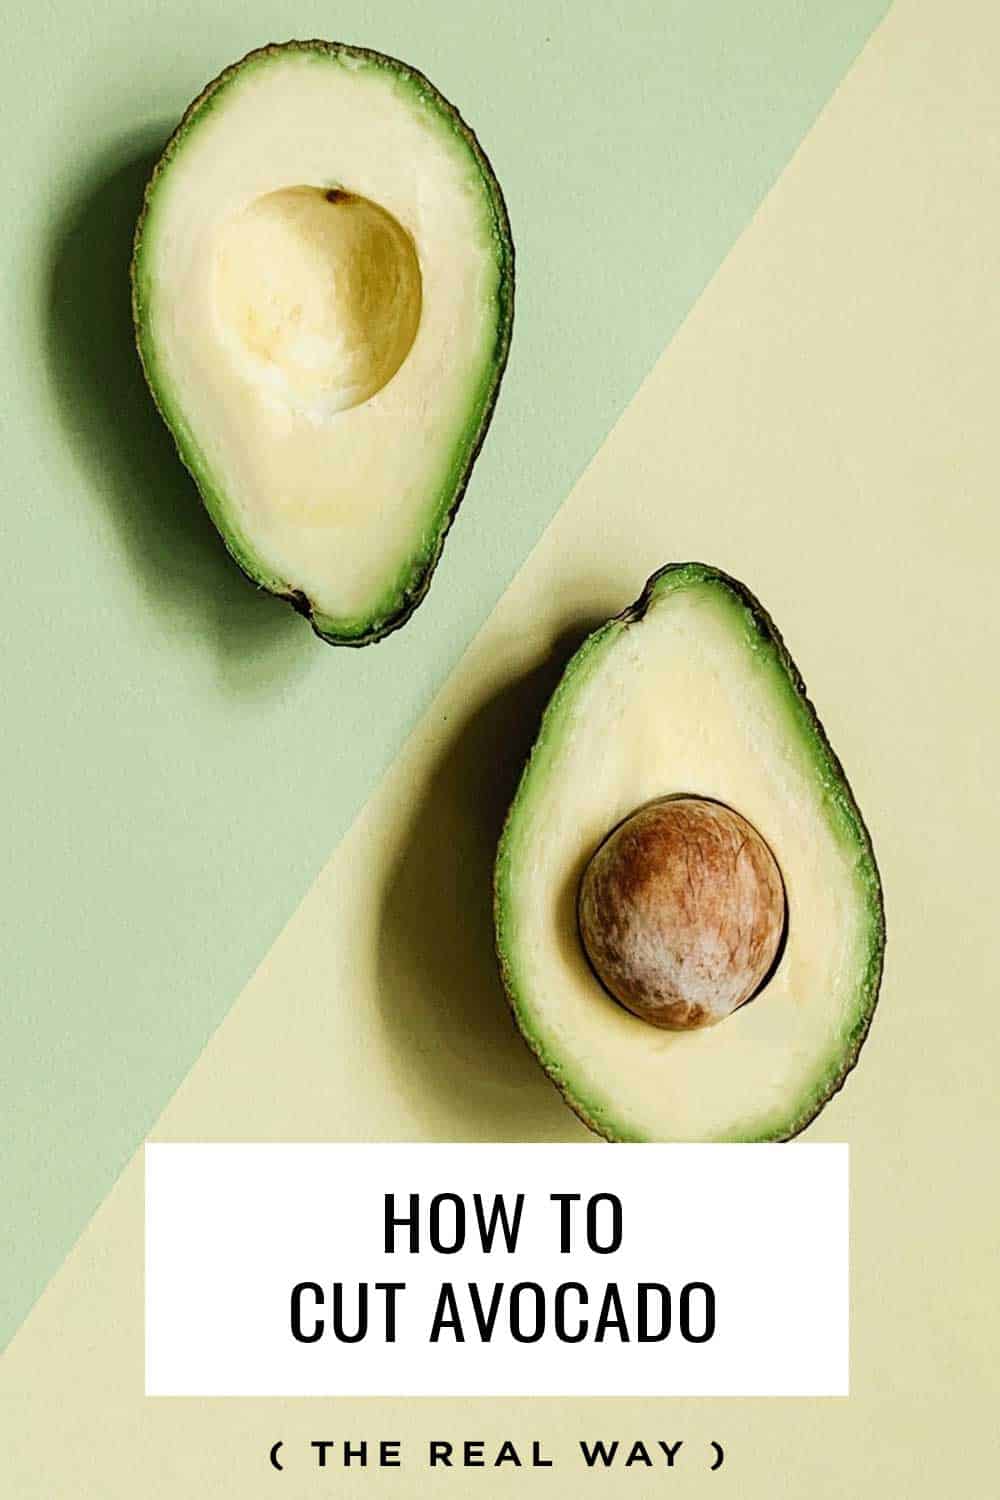 The real way to cut an avocado and not waste any